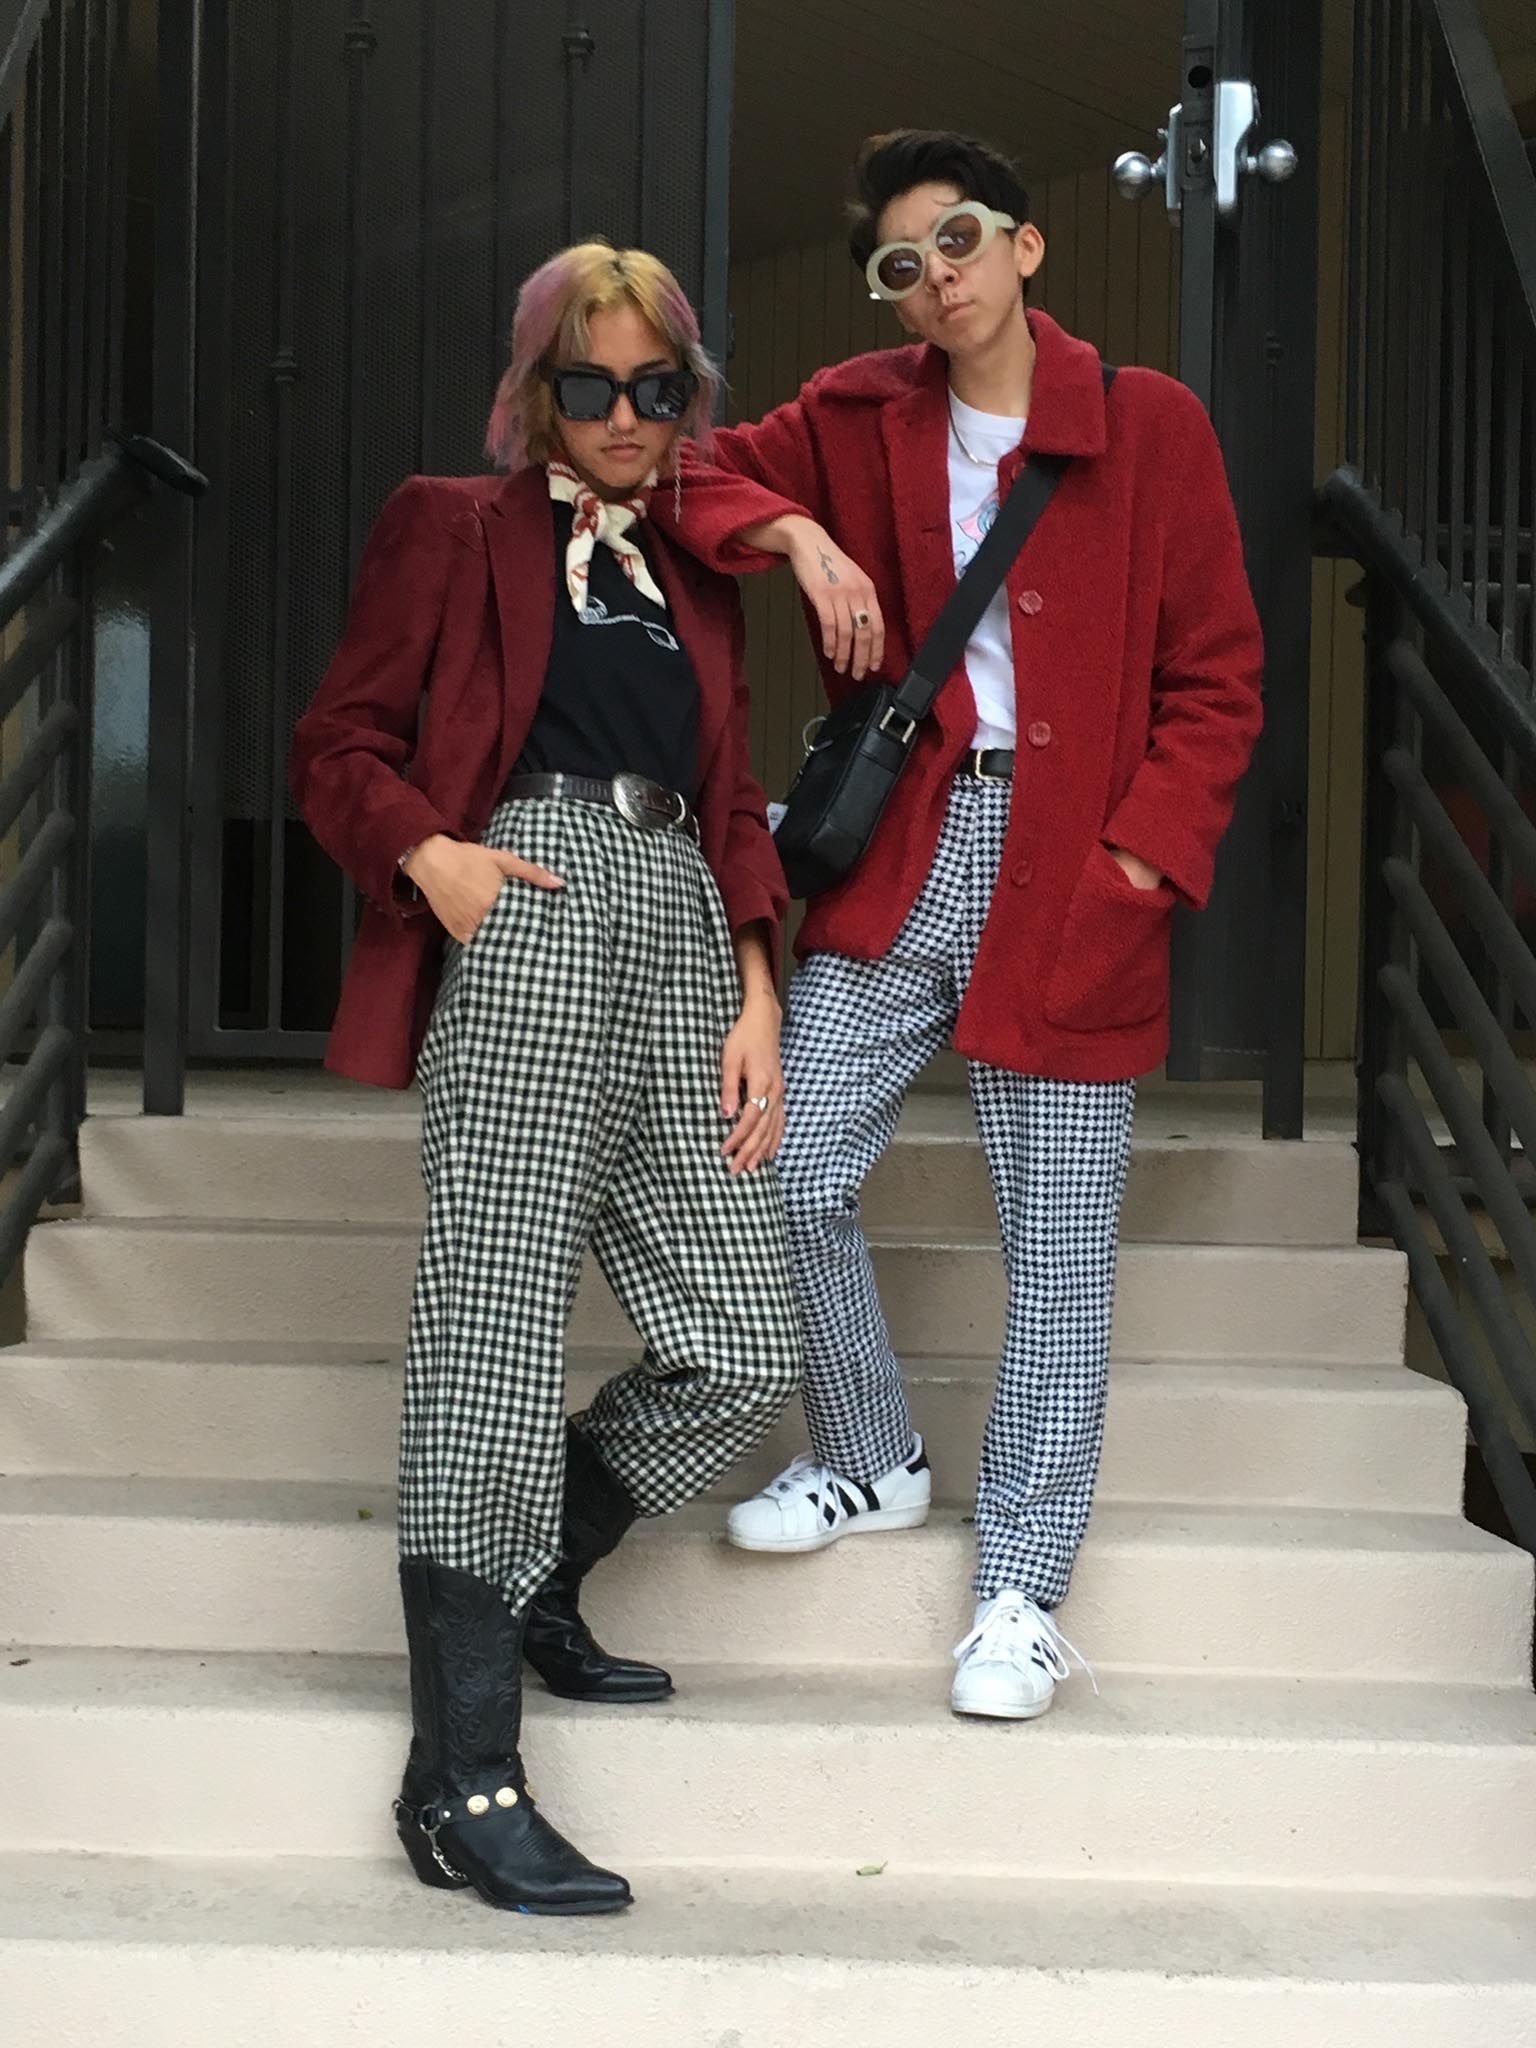 Two people wearing red jackets and black and white gingham pants